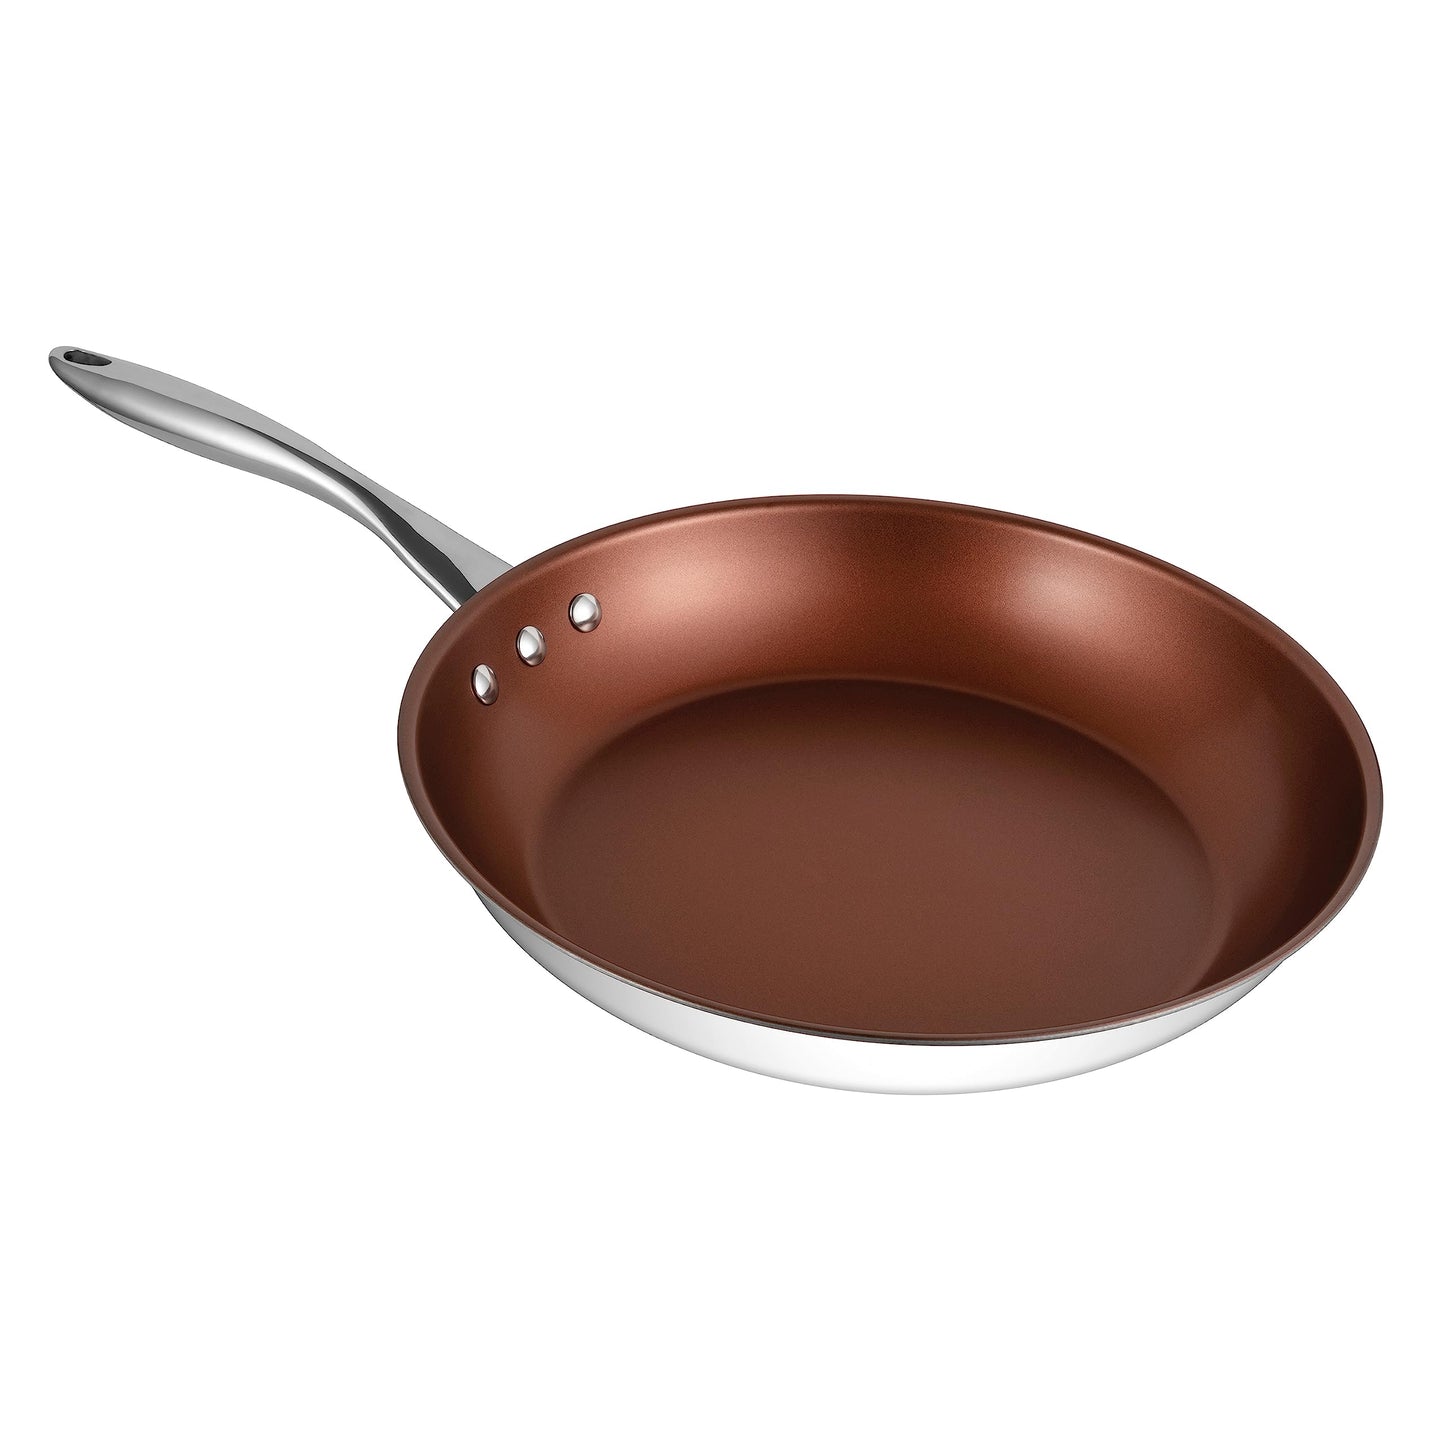 12" (30 cm) Stainless Steel Pan by Ozeri with ETERNA, a 100% PFOA and APEO-Free Non-Stick Coating